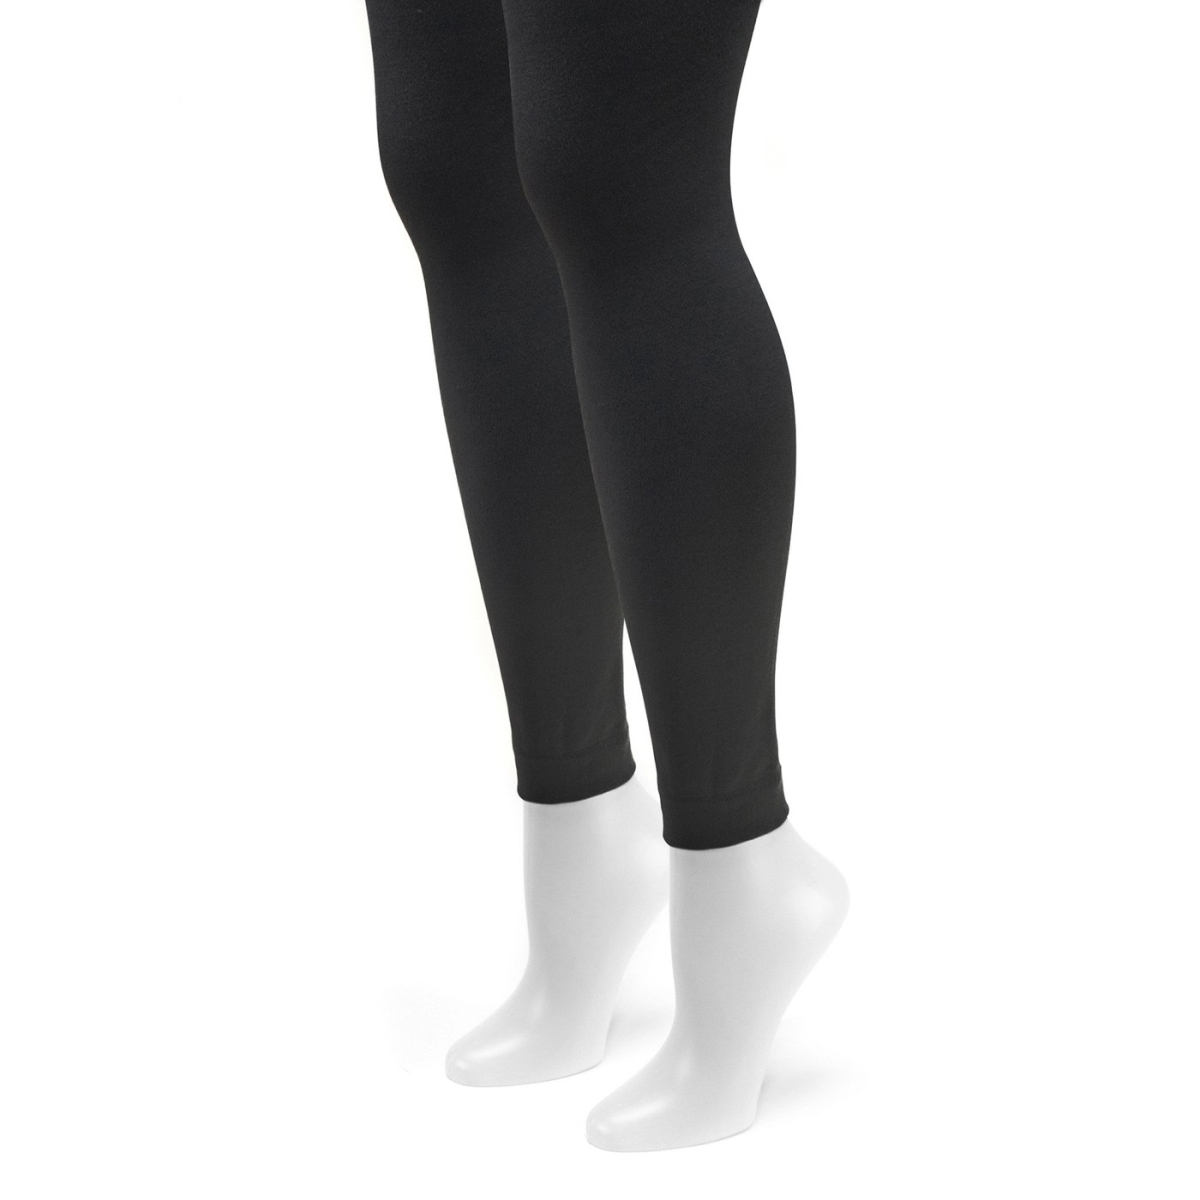 0023328997-s Womens Fleece Lined 2-pair Pack Footless Tights, Black & Black - Small